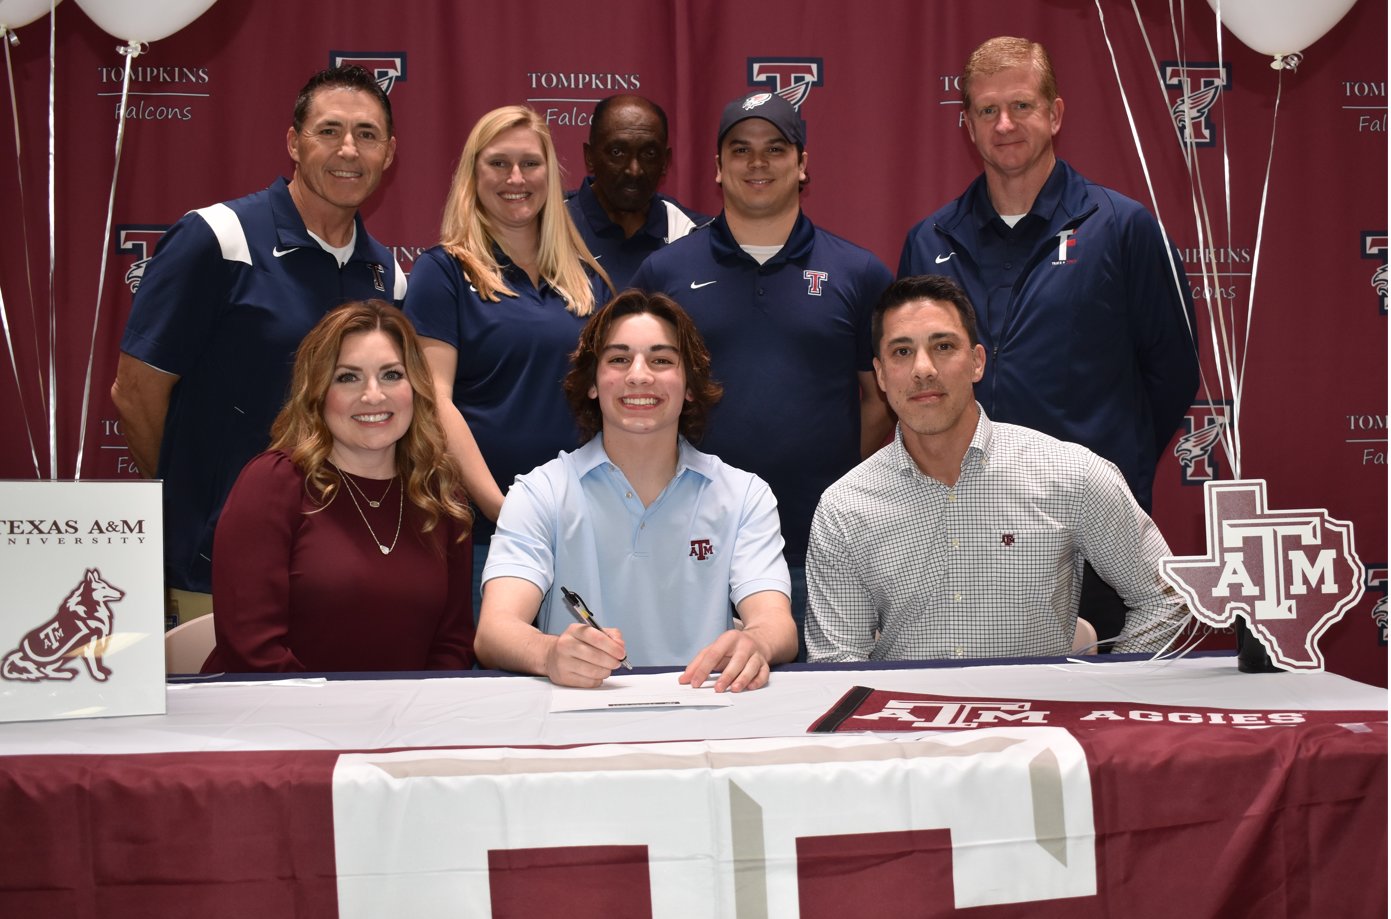 Matthew Aigner signed to dive at Texas A&M.